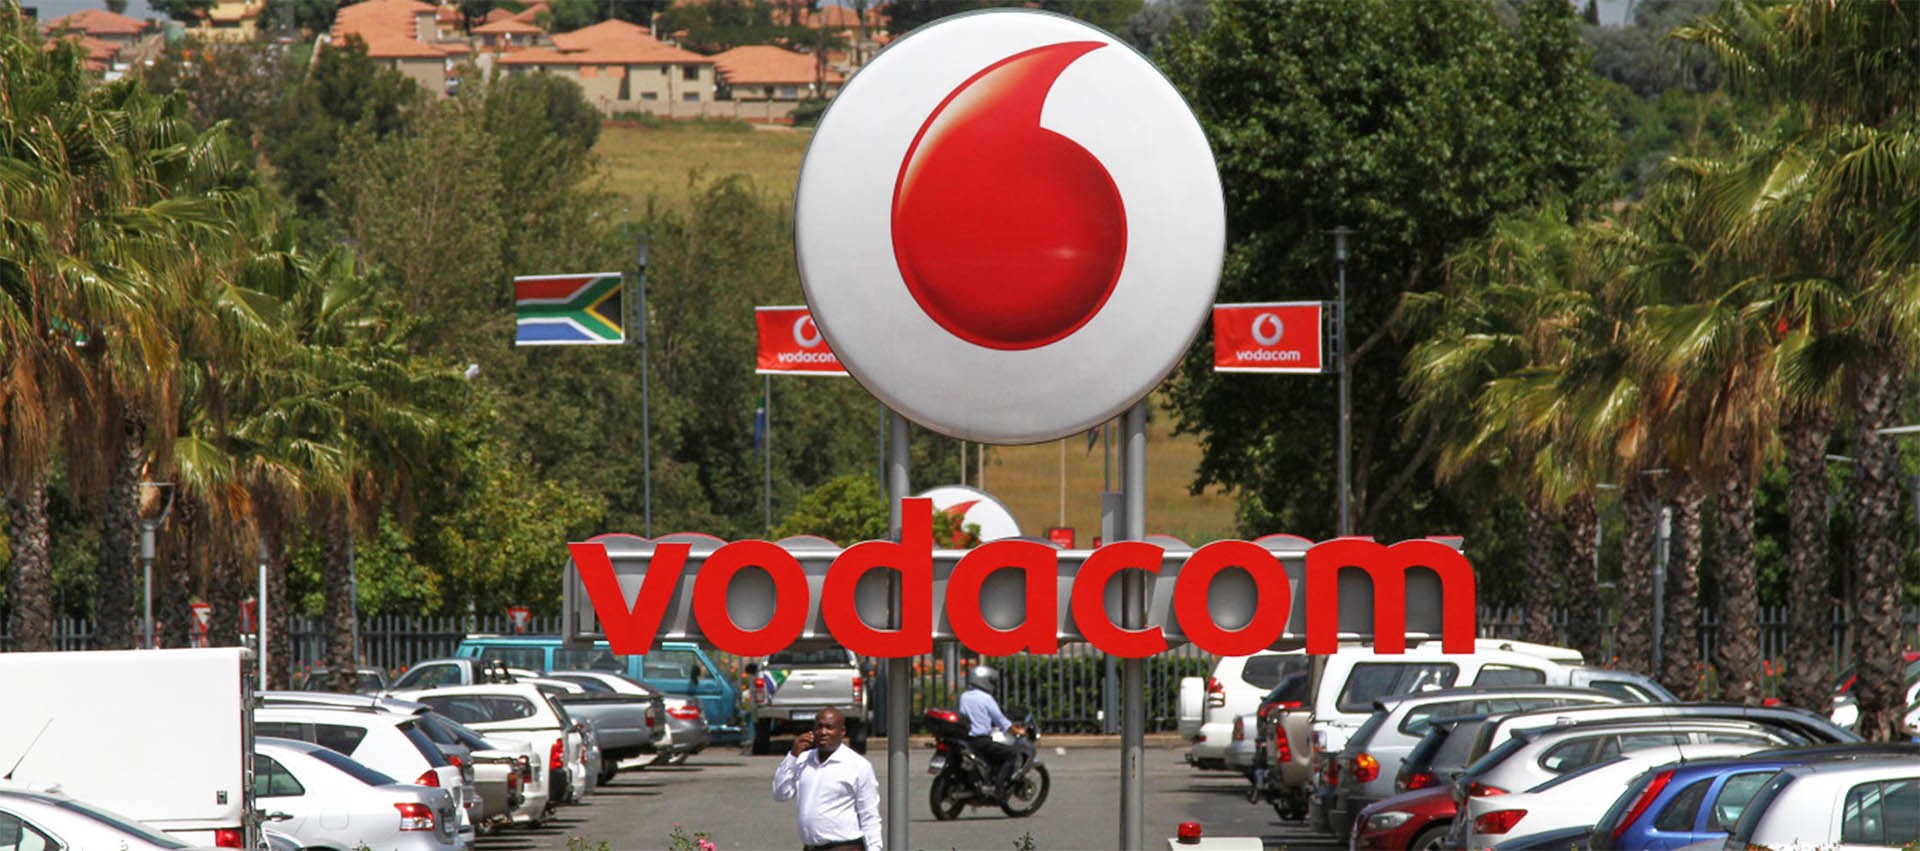 Vodacom Group - HB Radiofrequency